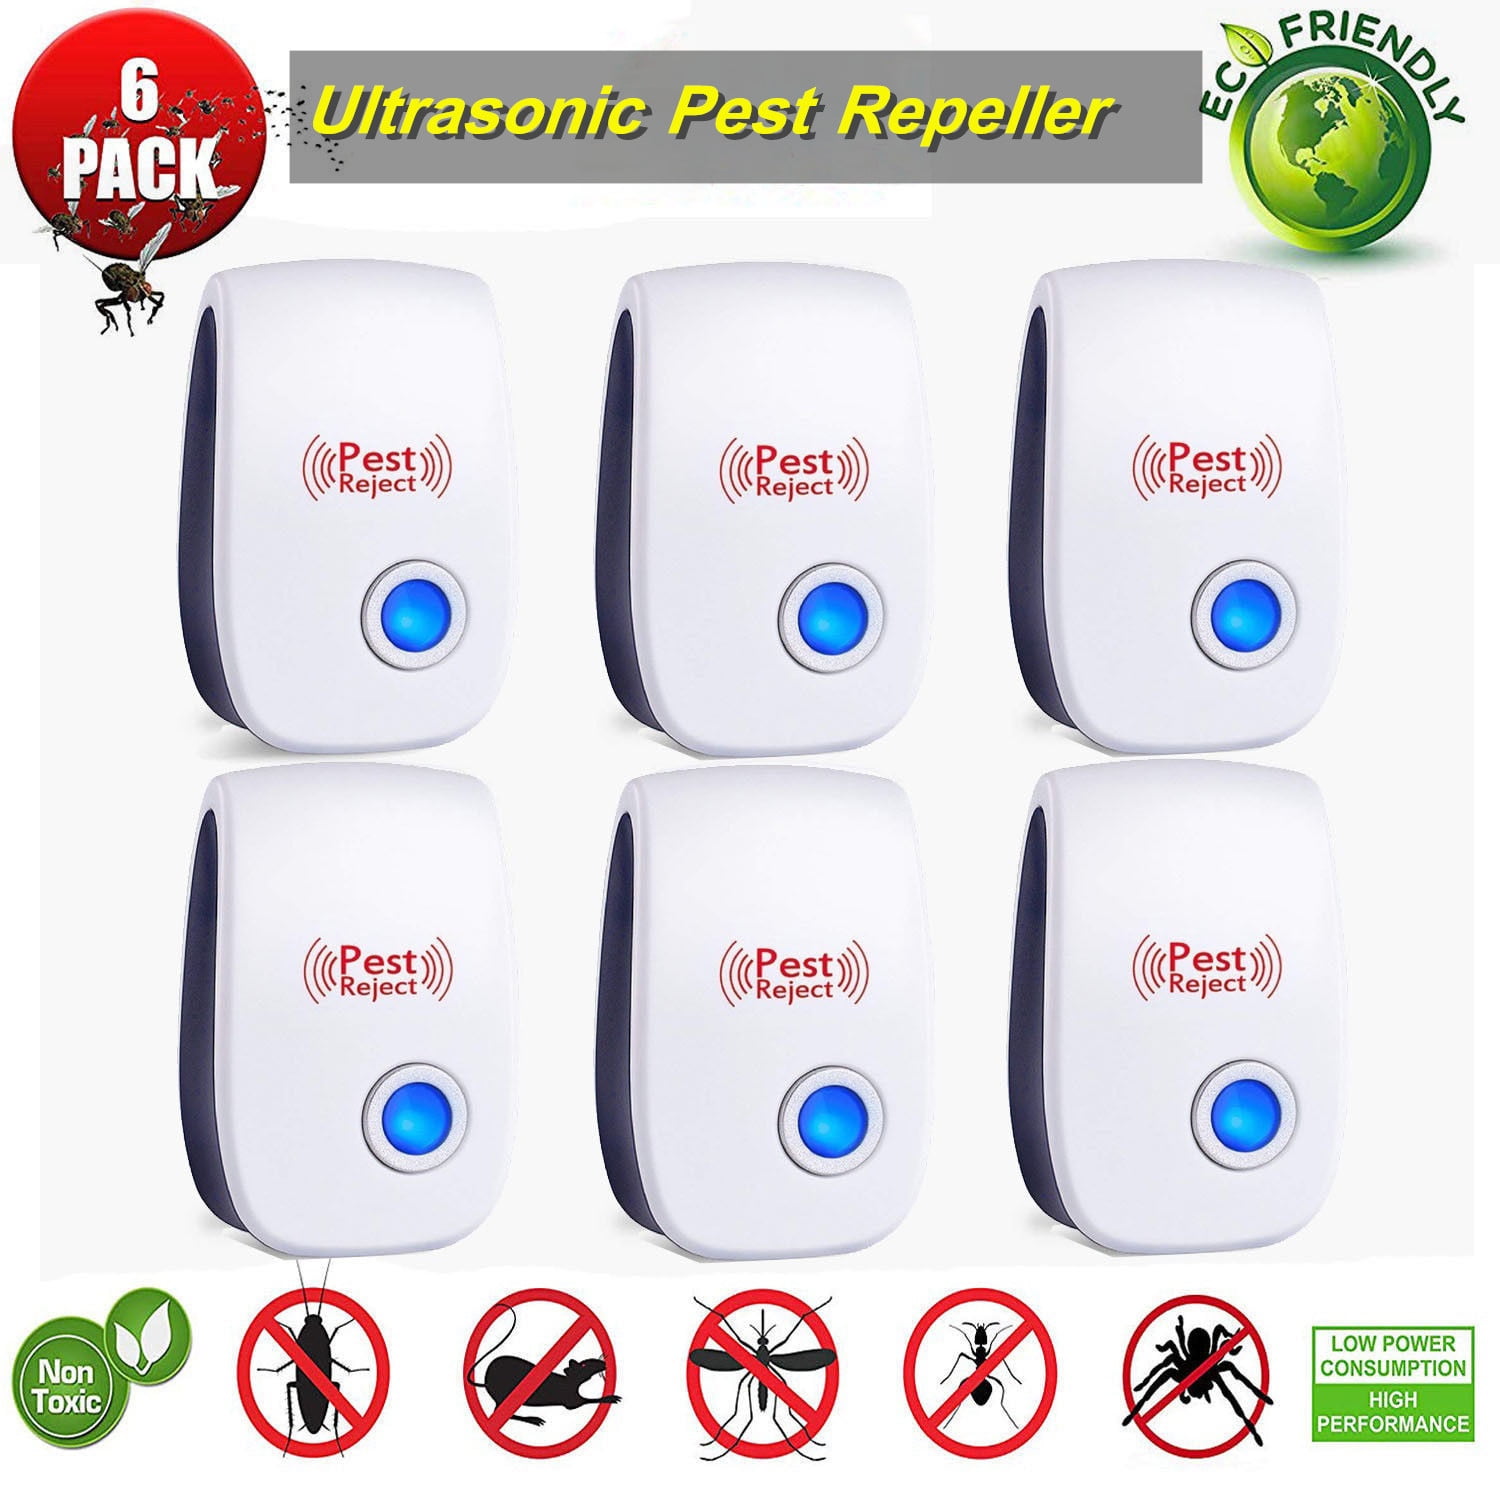 Ultrasonic Pest Repeller Mice Bug Mosquito Fly Cockroach Spider Rat Control 2019 